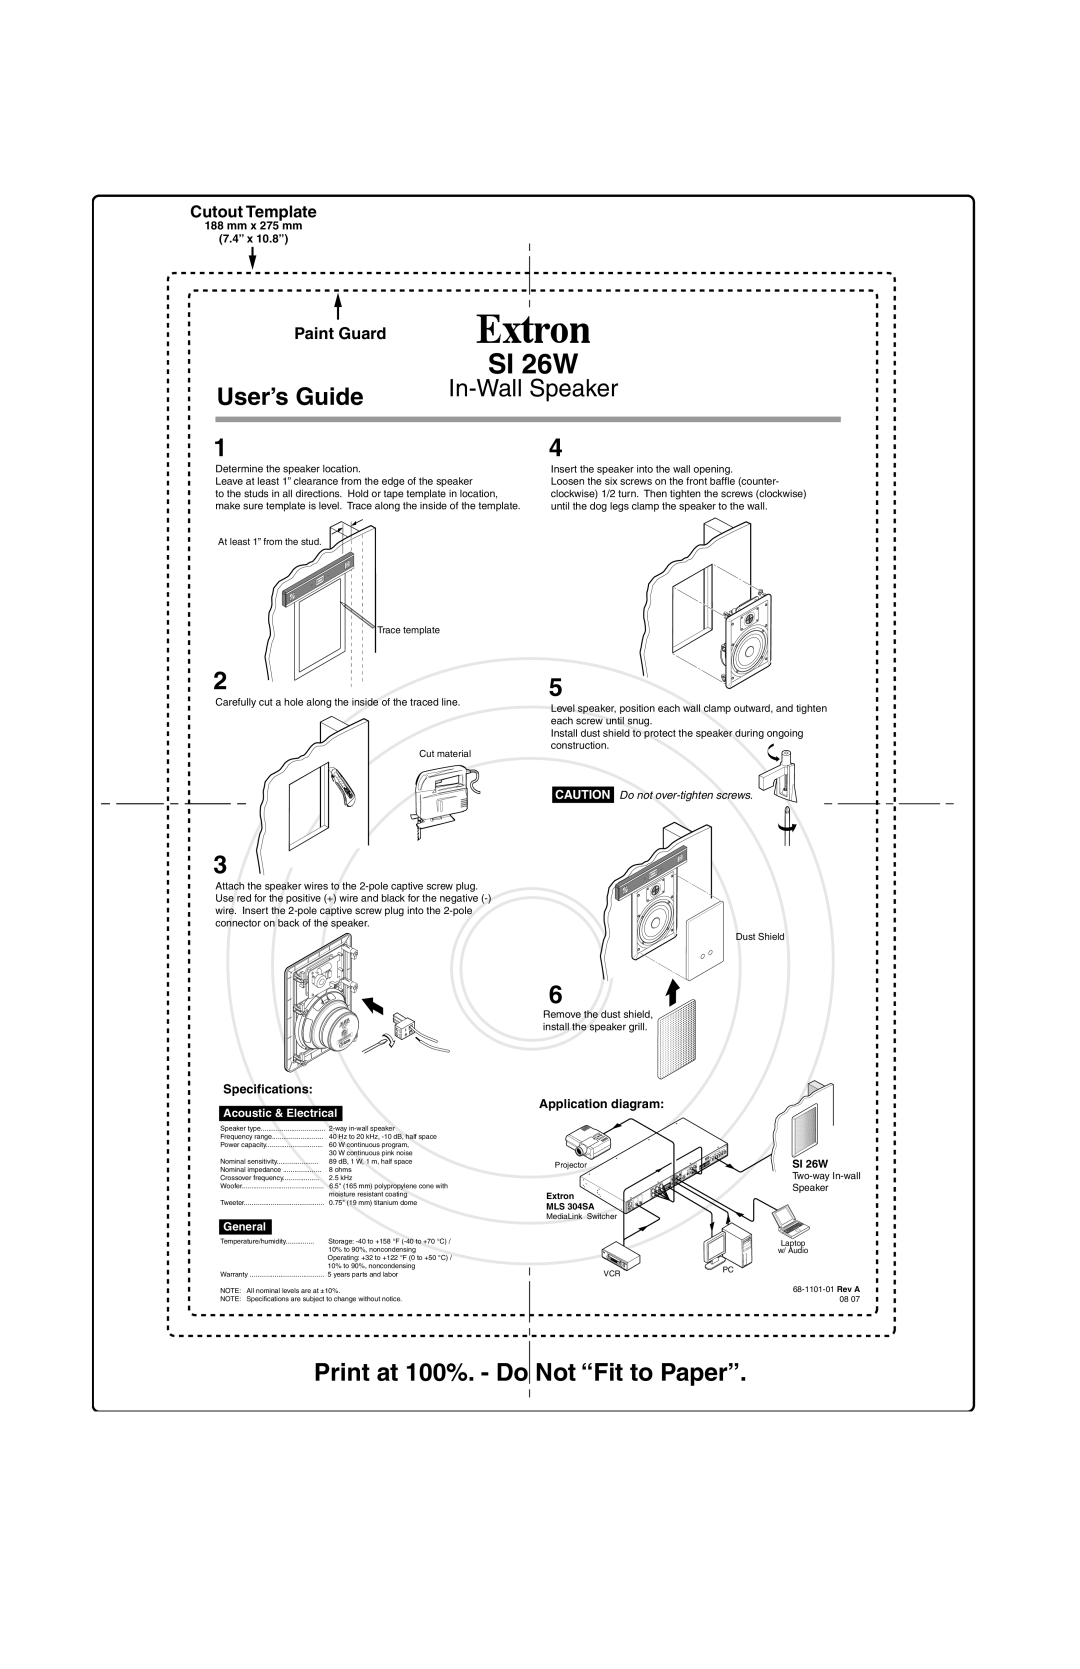 Extron electronic S1 26W specifications SI 26W, User’s Guide, In-Wall Speaker, Print at 100%. - Do Not “Fit to Paper” 